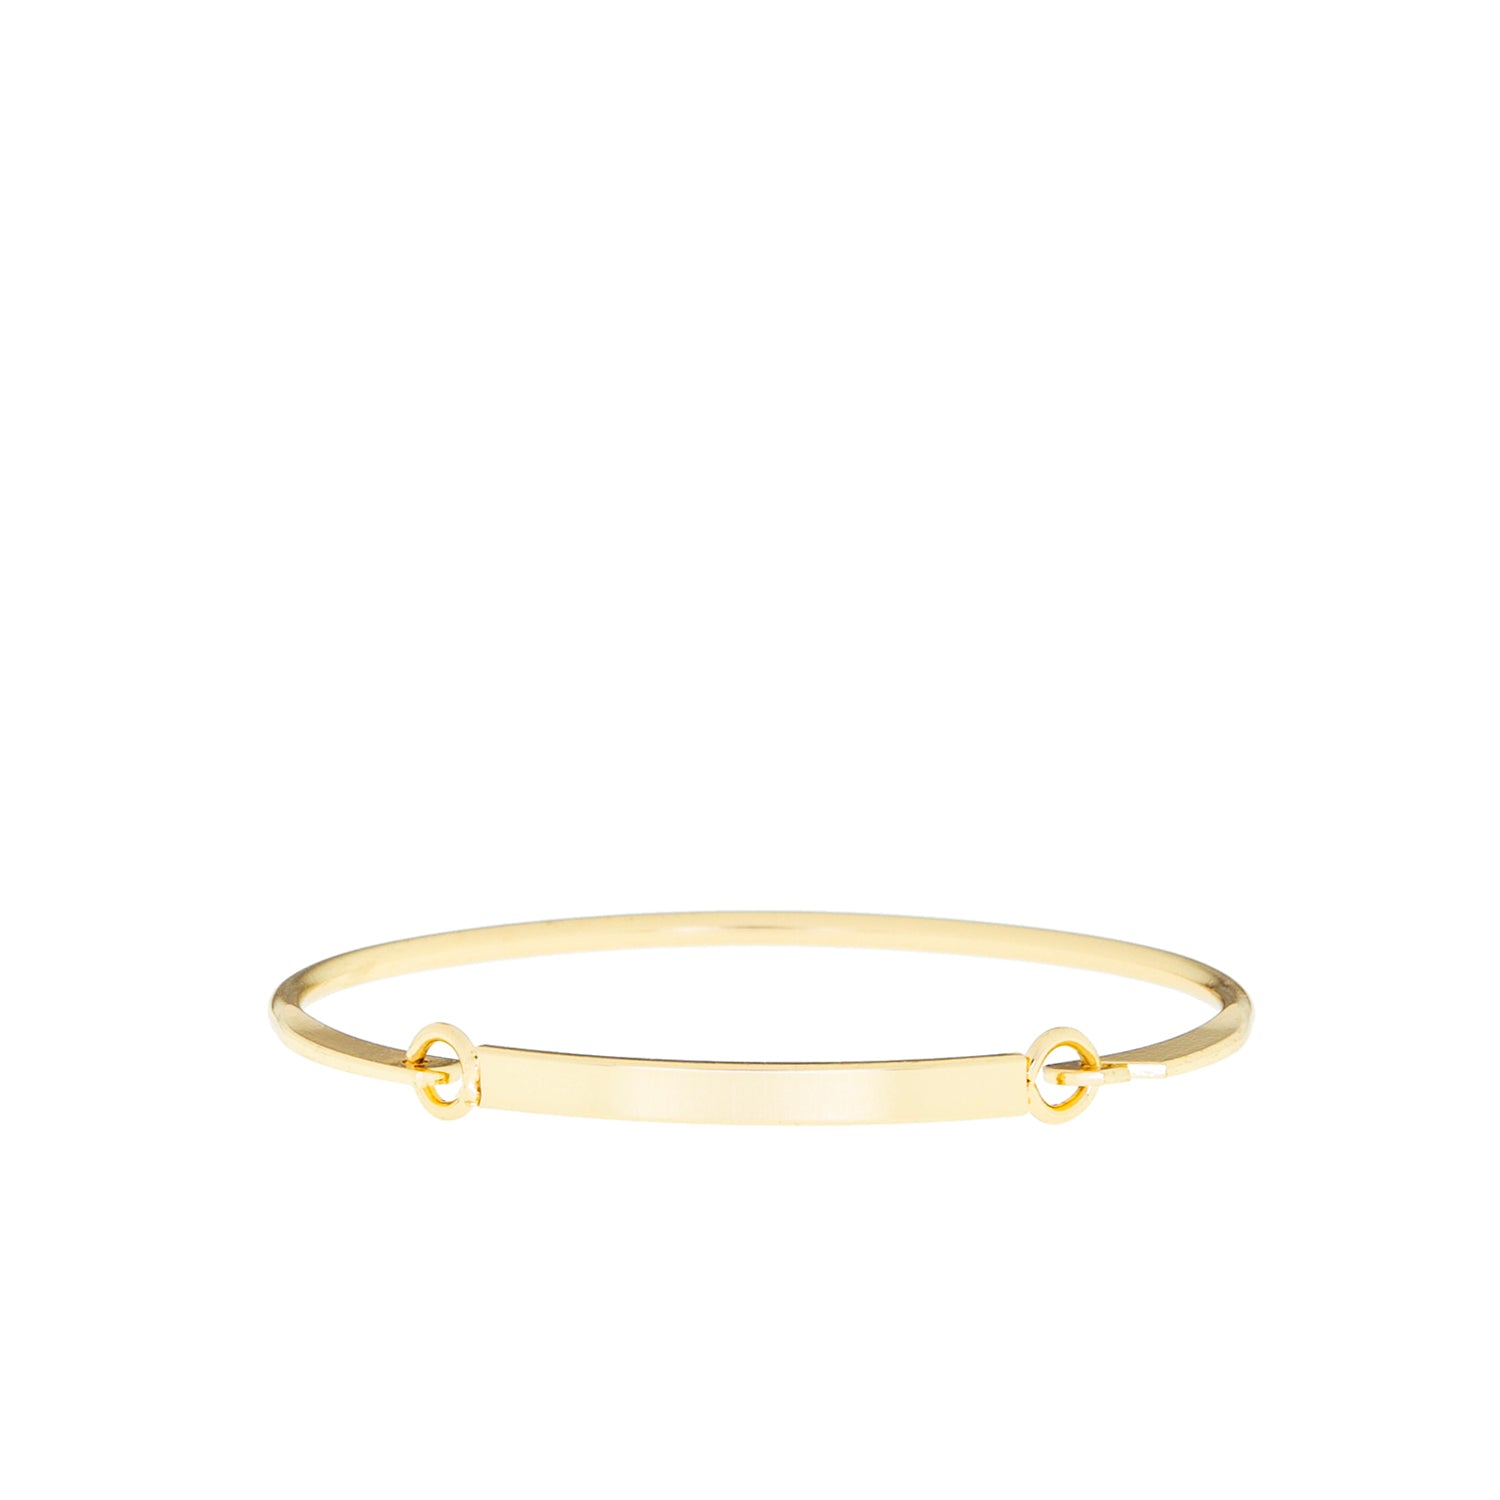 Hook Closure Bangle – Envy My Couture